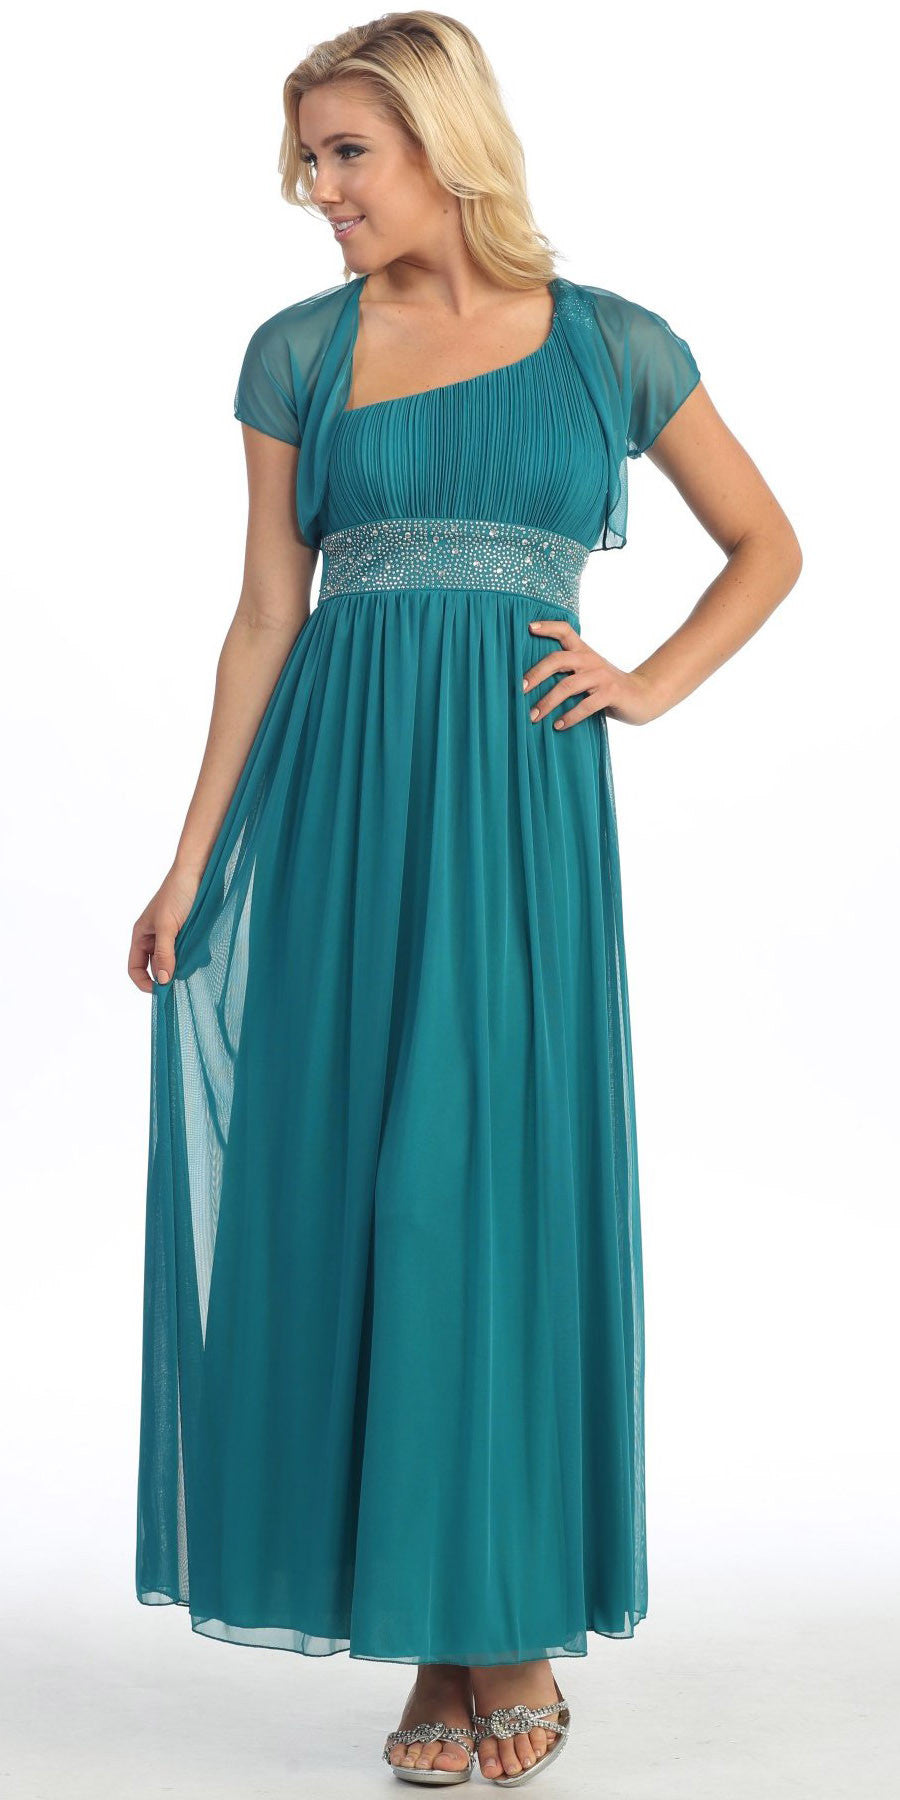 Dinner Party Long Teal Green One Shoulder Dress Chiffon Empire Rhinest ...